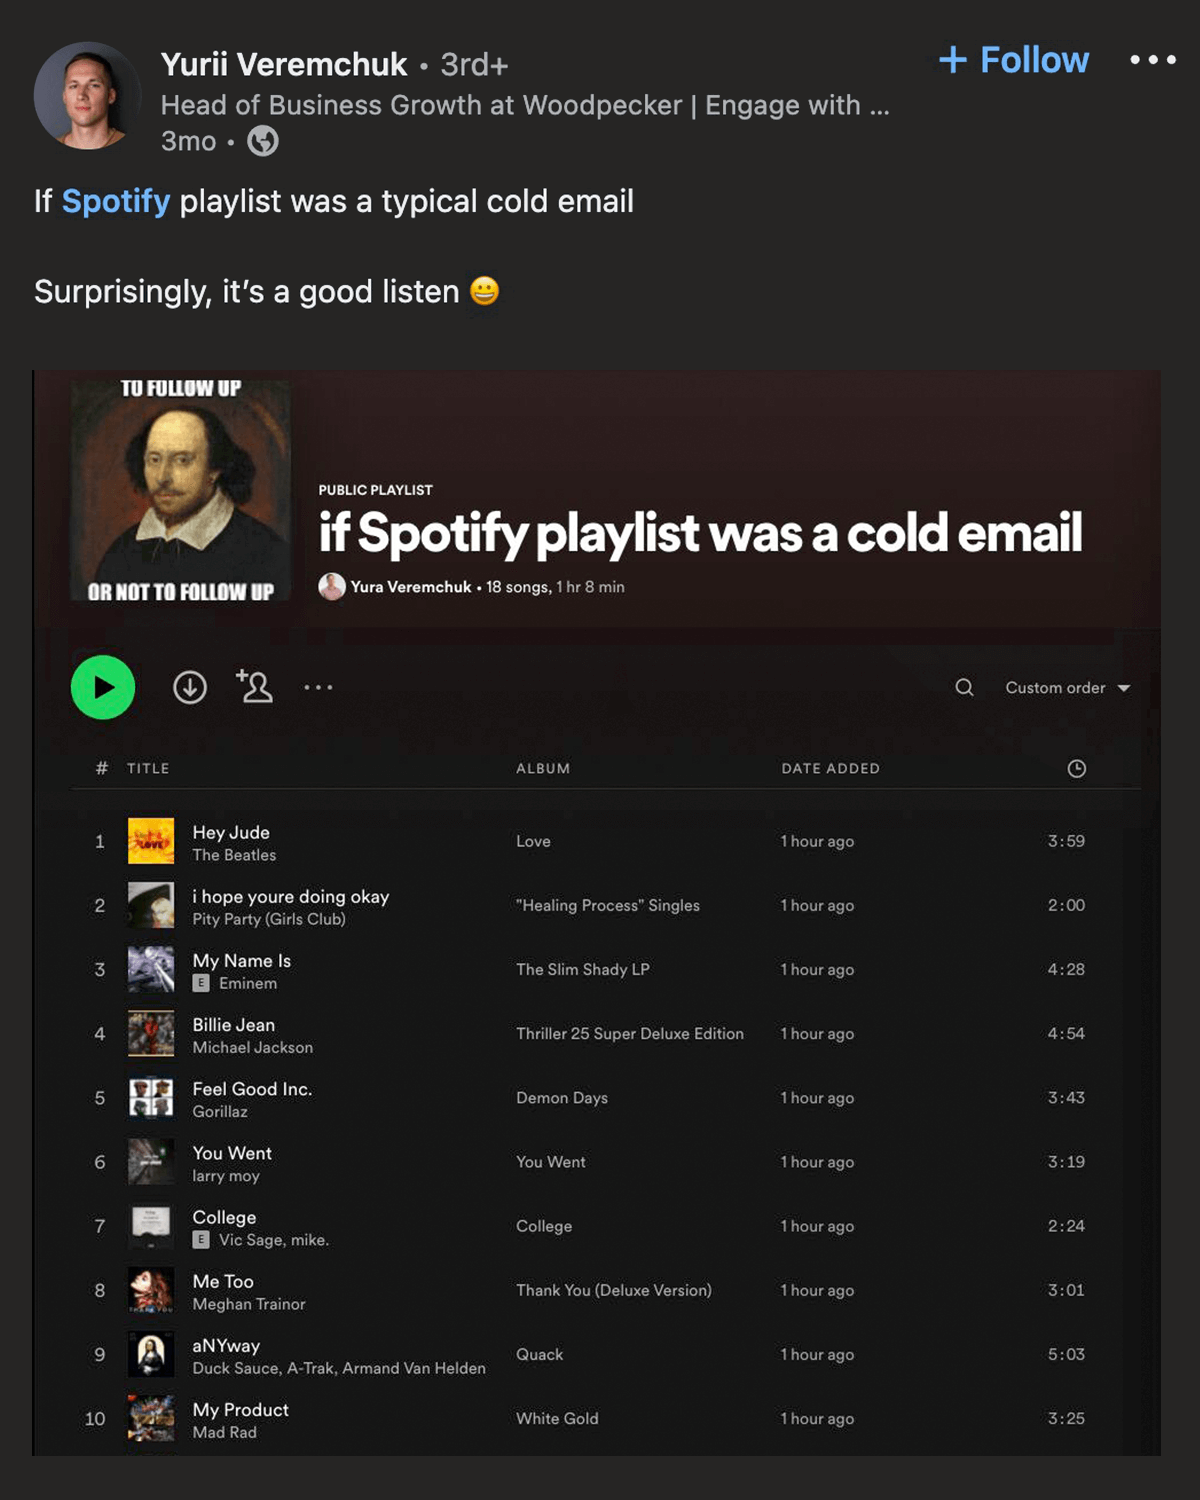 Yurii Veremchuk on LinkedIn: If Spotify playlist was a typical cold email. Surprisingly, it's a good listen :D